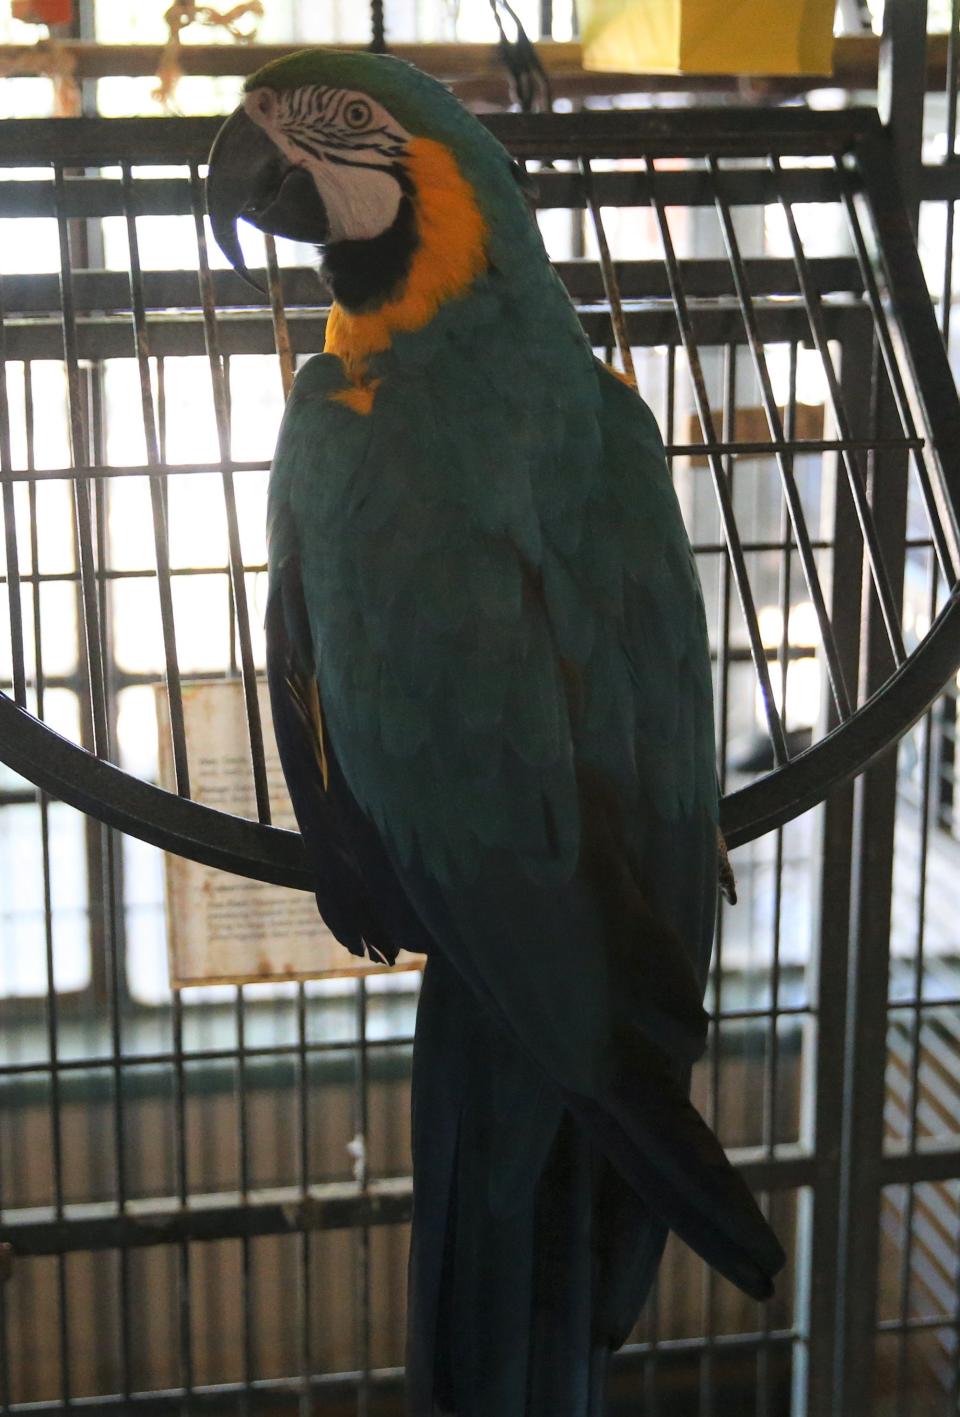 A blue-and-gold mackaw checks out the visitors at the San Angelo Nature Center on Friday, July 8, 2022.